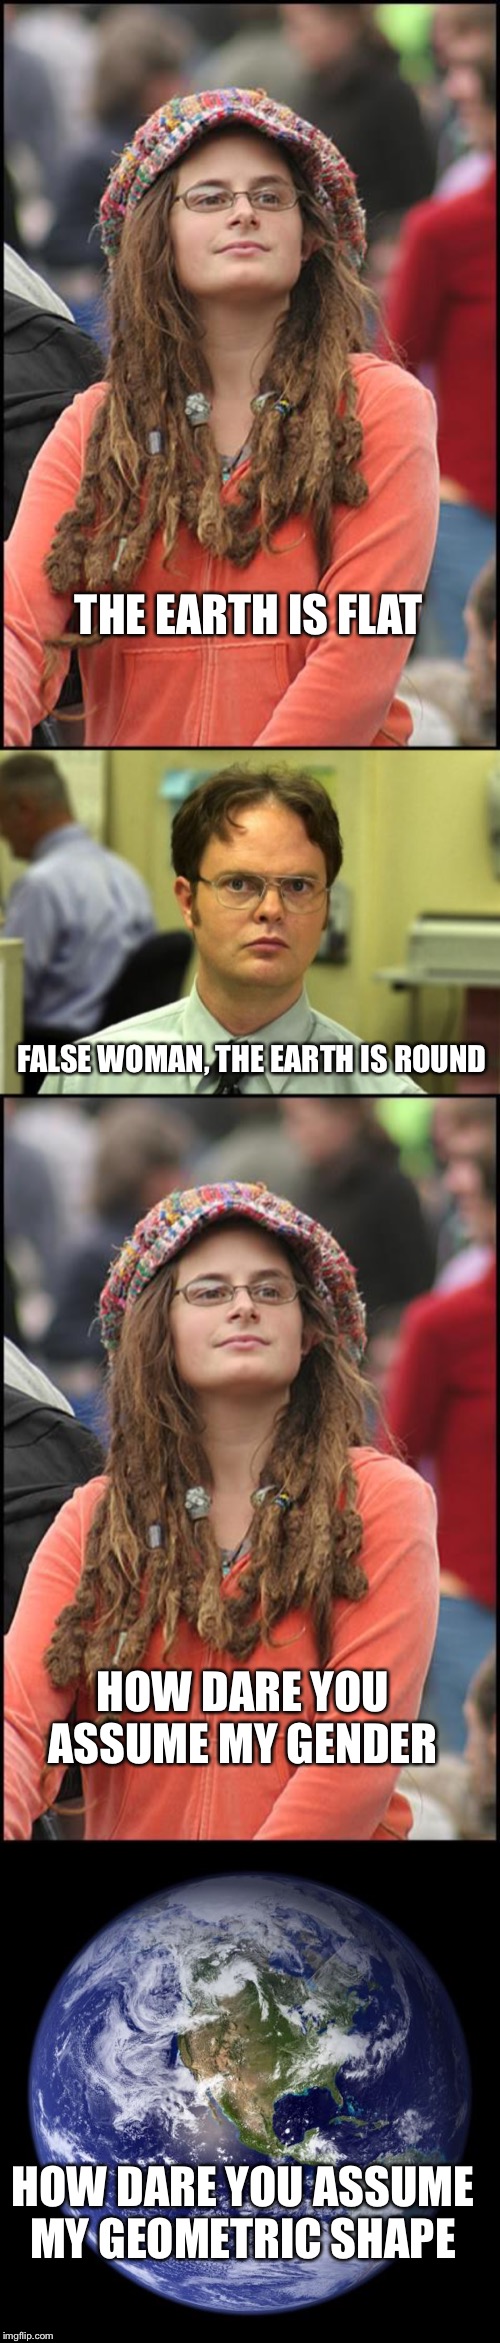 THE EARTH IS FLAT; FALSE WOMAN, THE EARTH IS ROUND; HOW DARE YOU ASSUME MY GENDER; HOW DARE YOU ASSUME MY GEOMETRIC SHAPE | image tagged in memes,dwight schrute,college liberal,earth | made w/ Imgflip meme maker